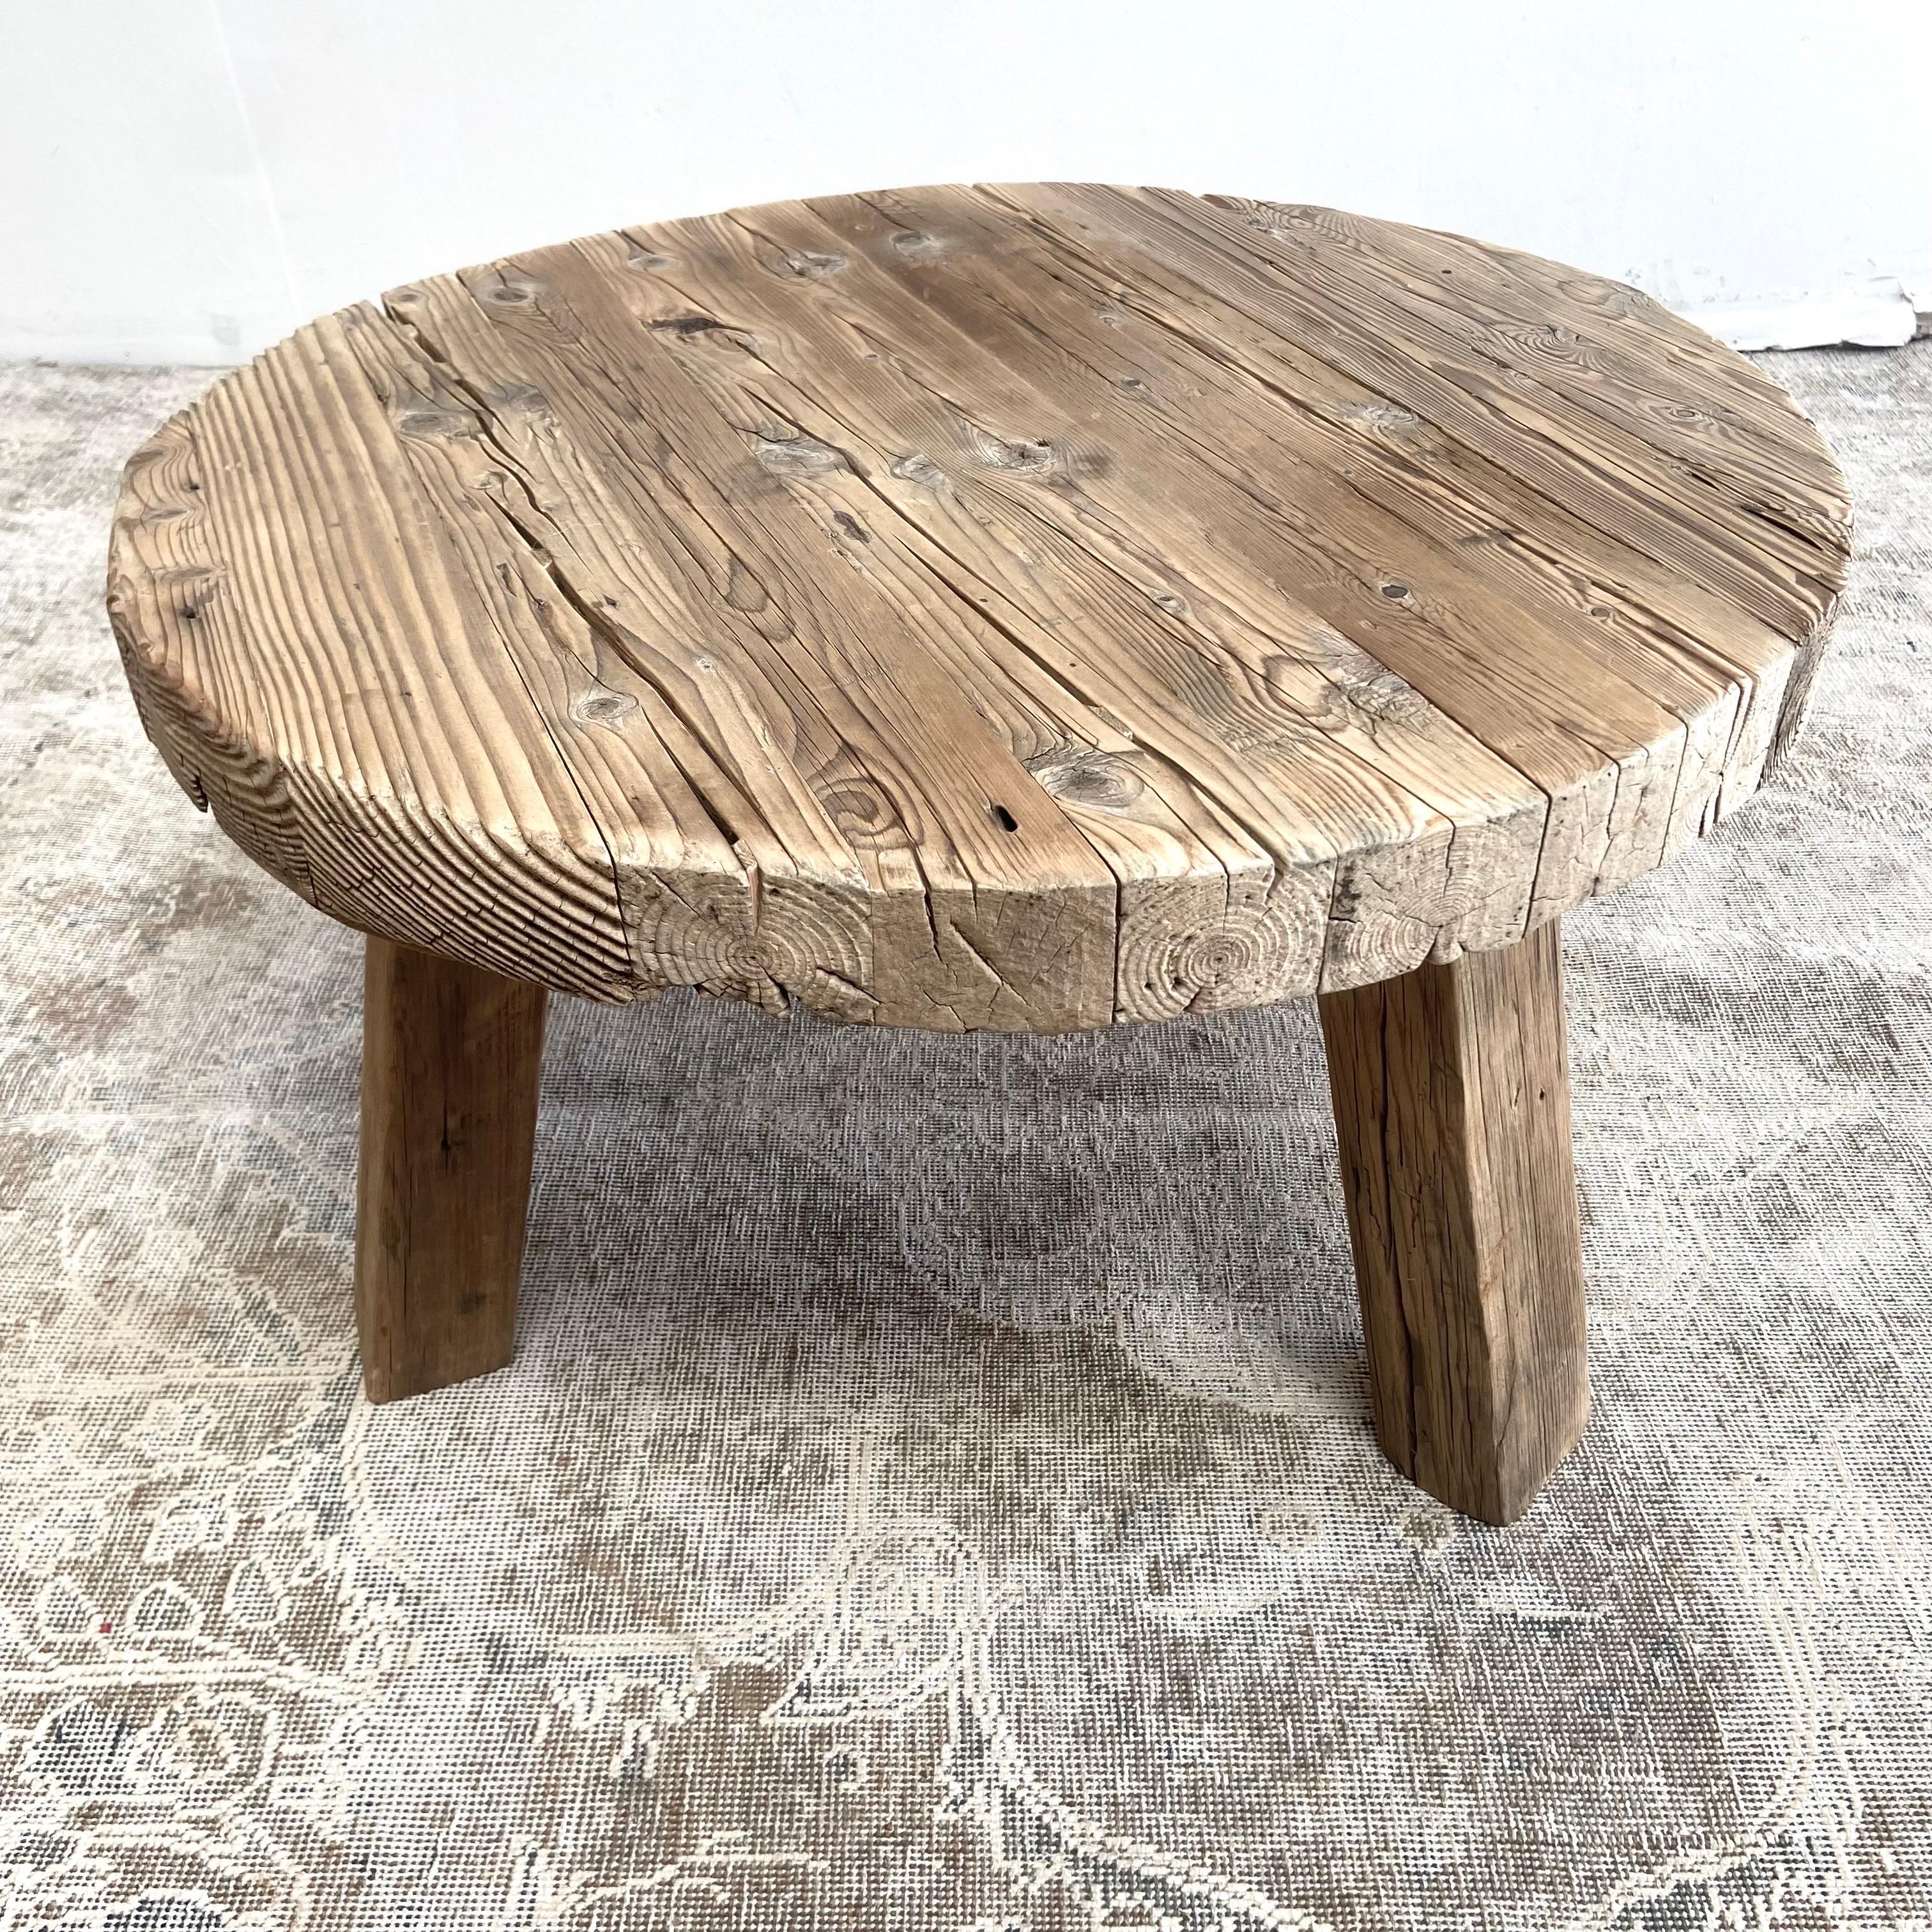 Elm coffee table 
Vintage antique elm wood coffee table with beautiful antique weathered patina top beautiful antique patina, with weathering and age, these are solid and sturdy ready for daily use, use as a coffee table or entry bench. Each piece